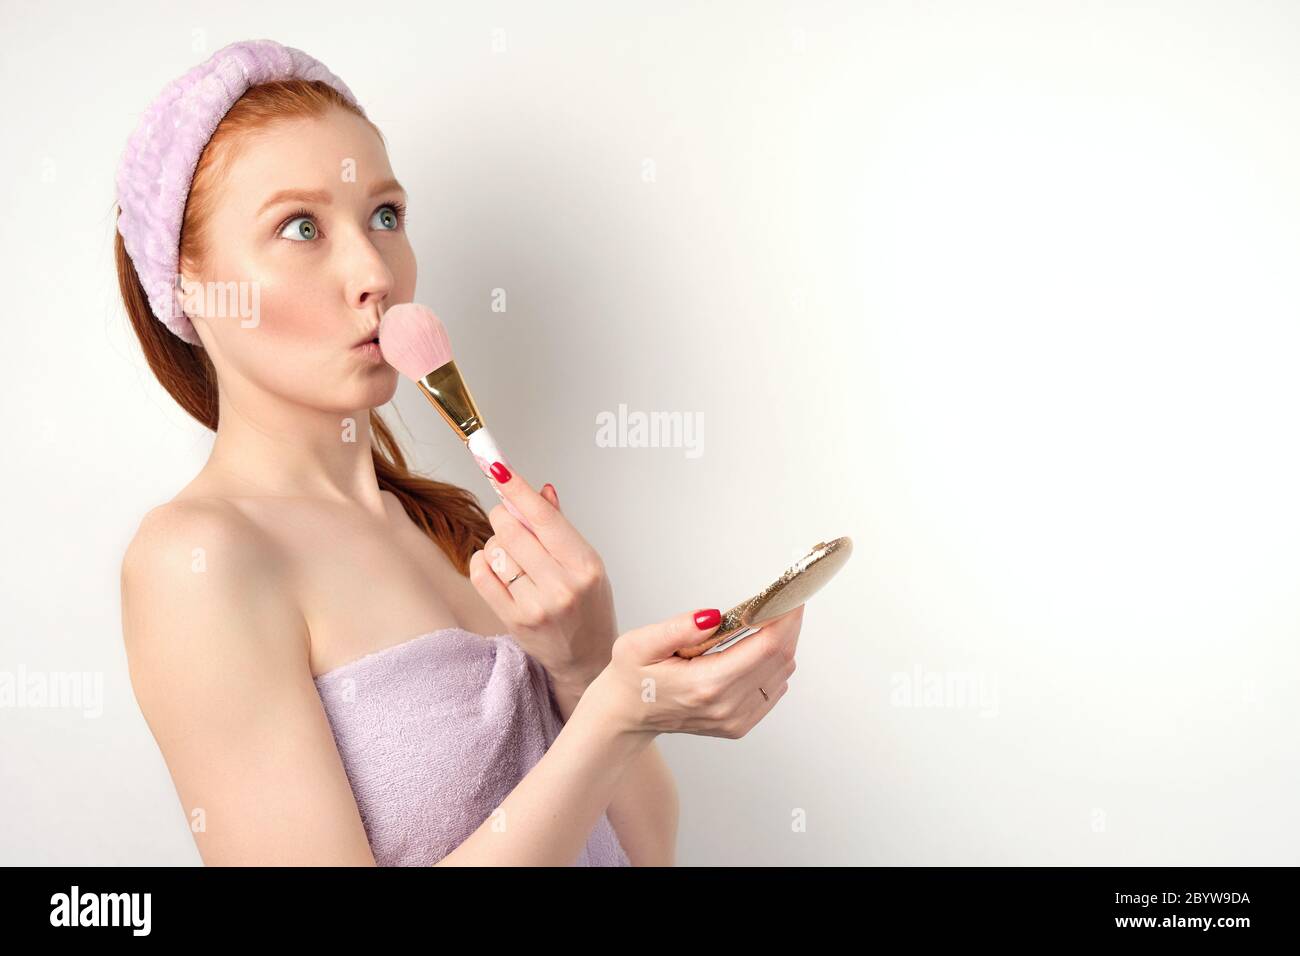 A red-haired girl is standing on a white background in a towel, Stock Photo